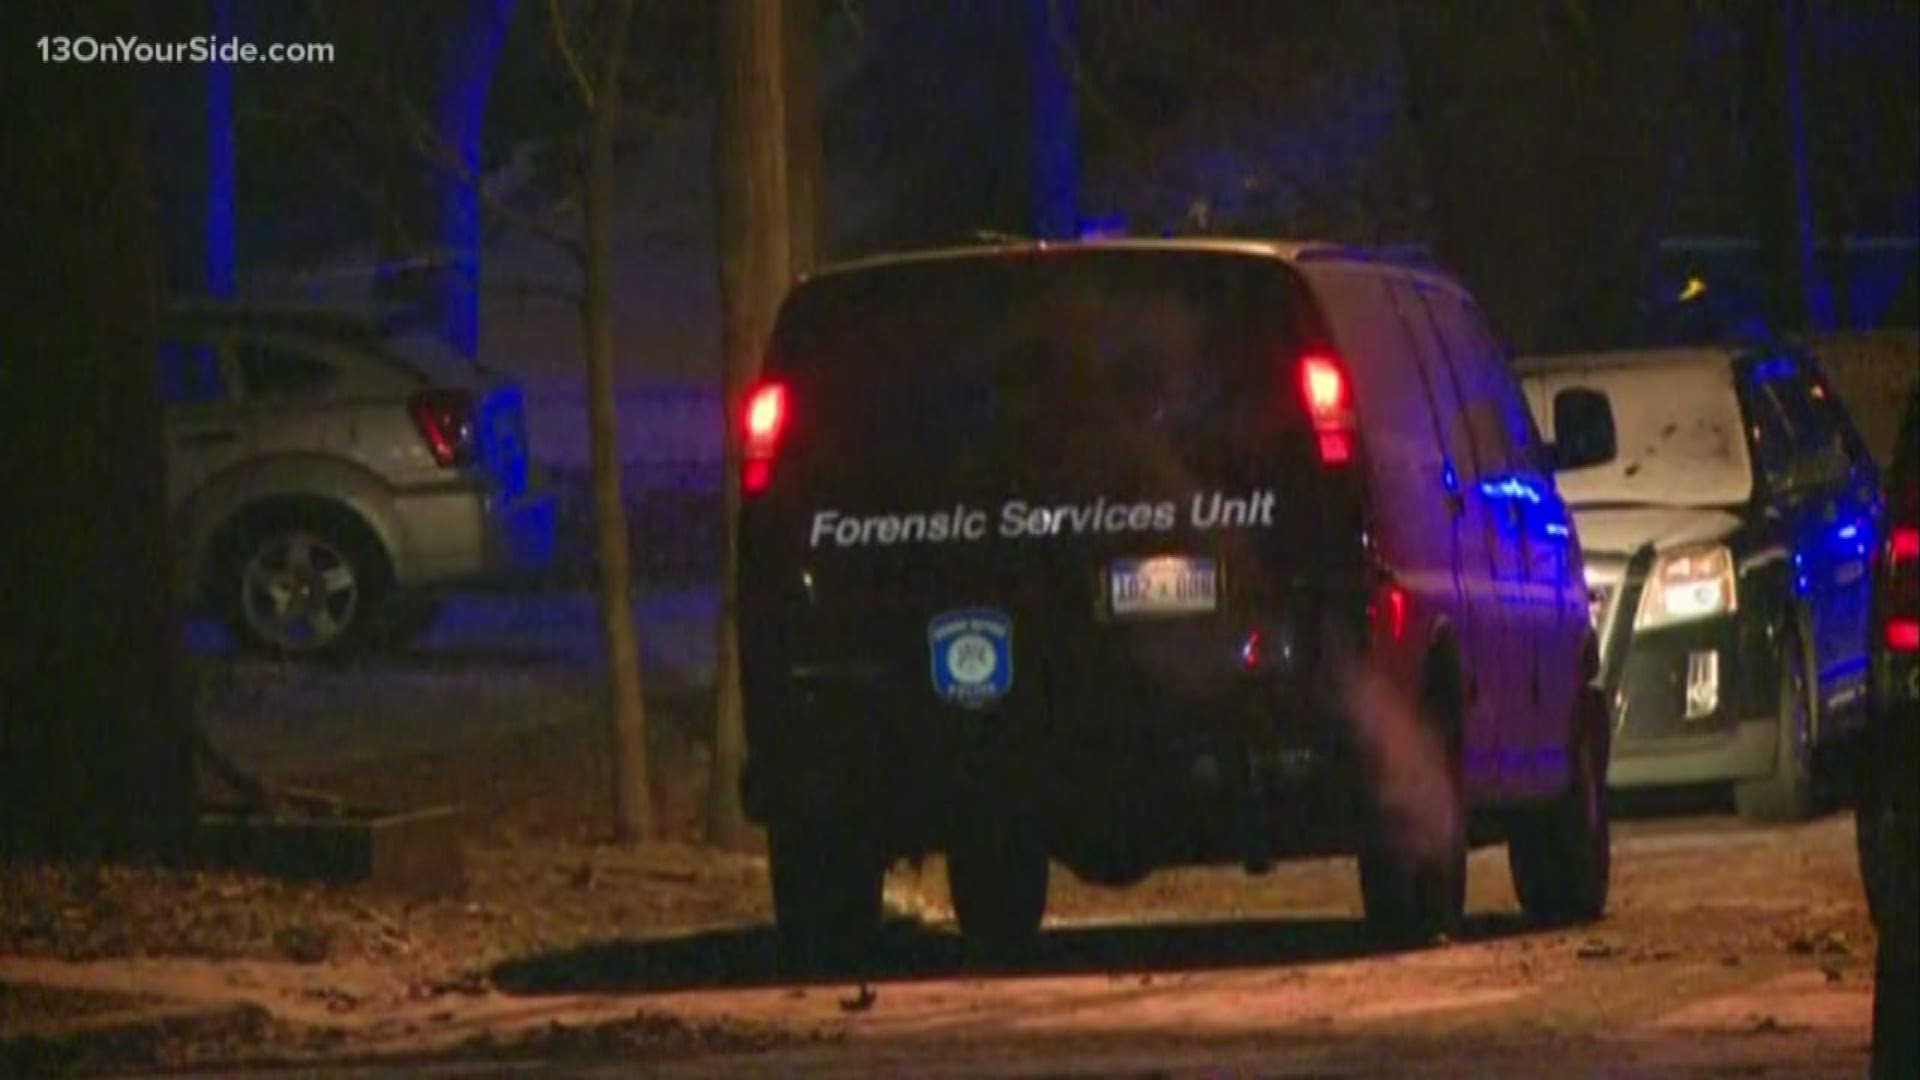 A homeowner on the northeast side of the city shot and killed a man who entered his home.